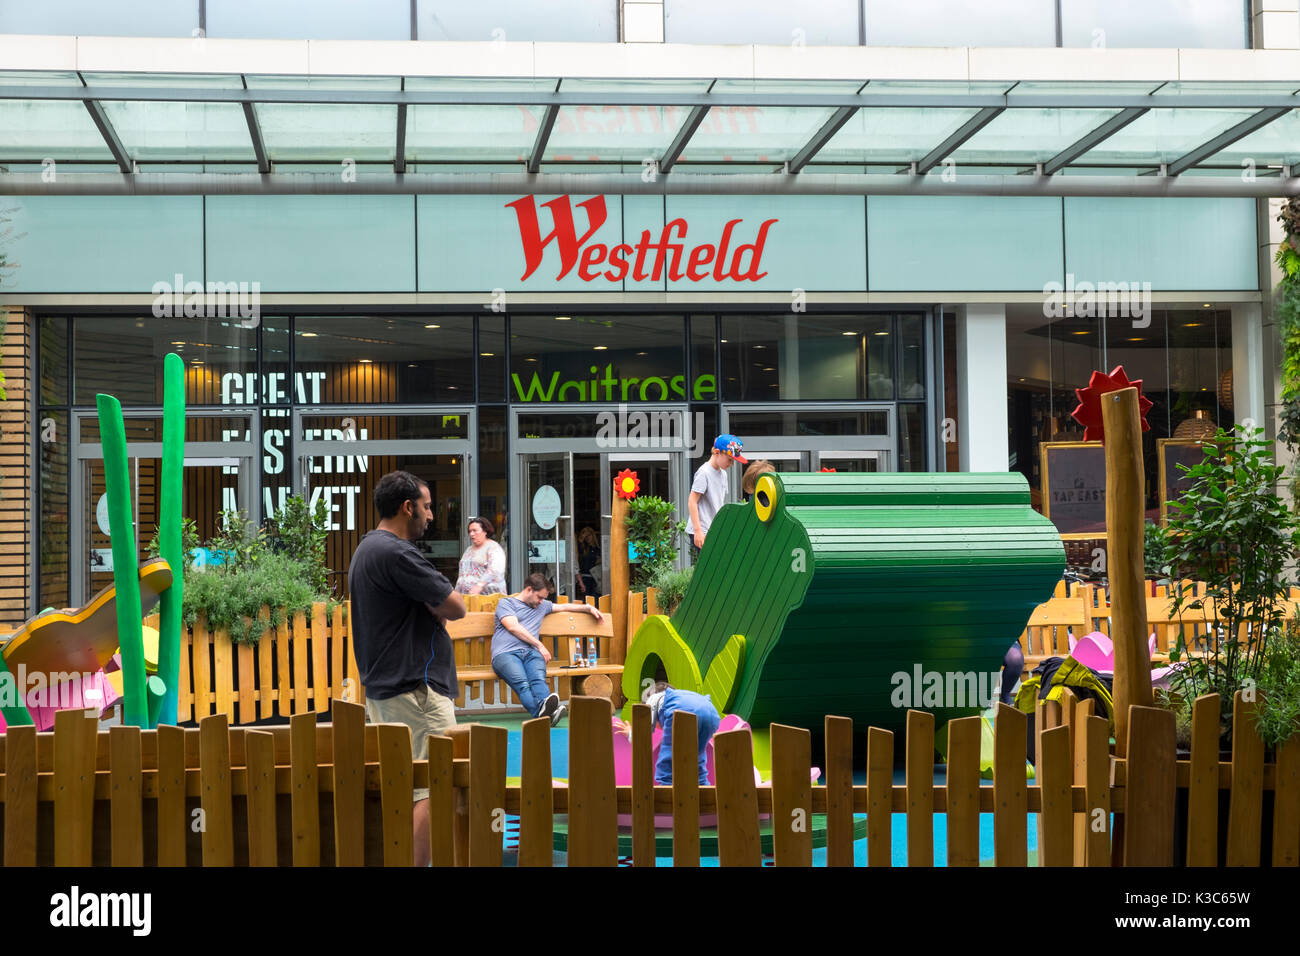 Playground, play area for young children located outside the westfield shopping mall, stratford, london, uk Stock Photo